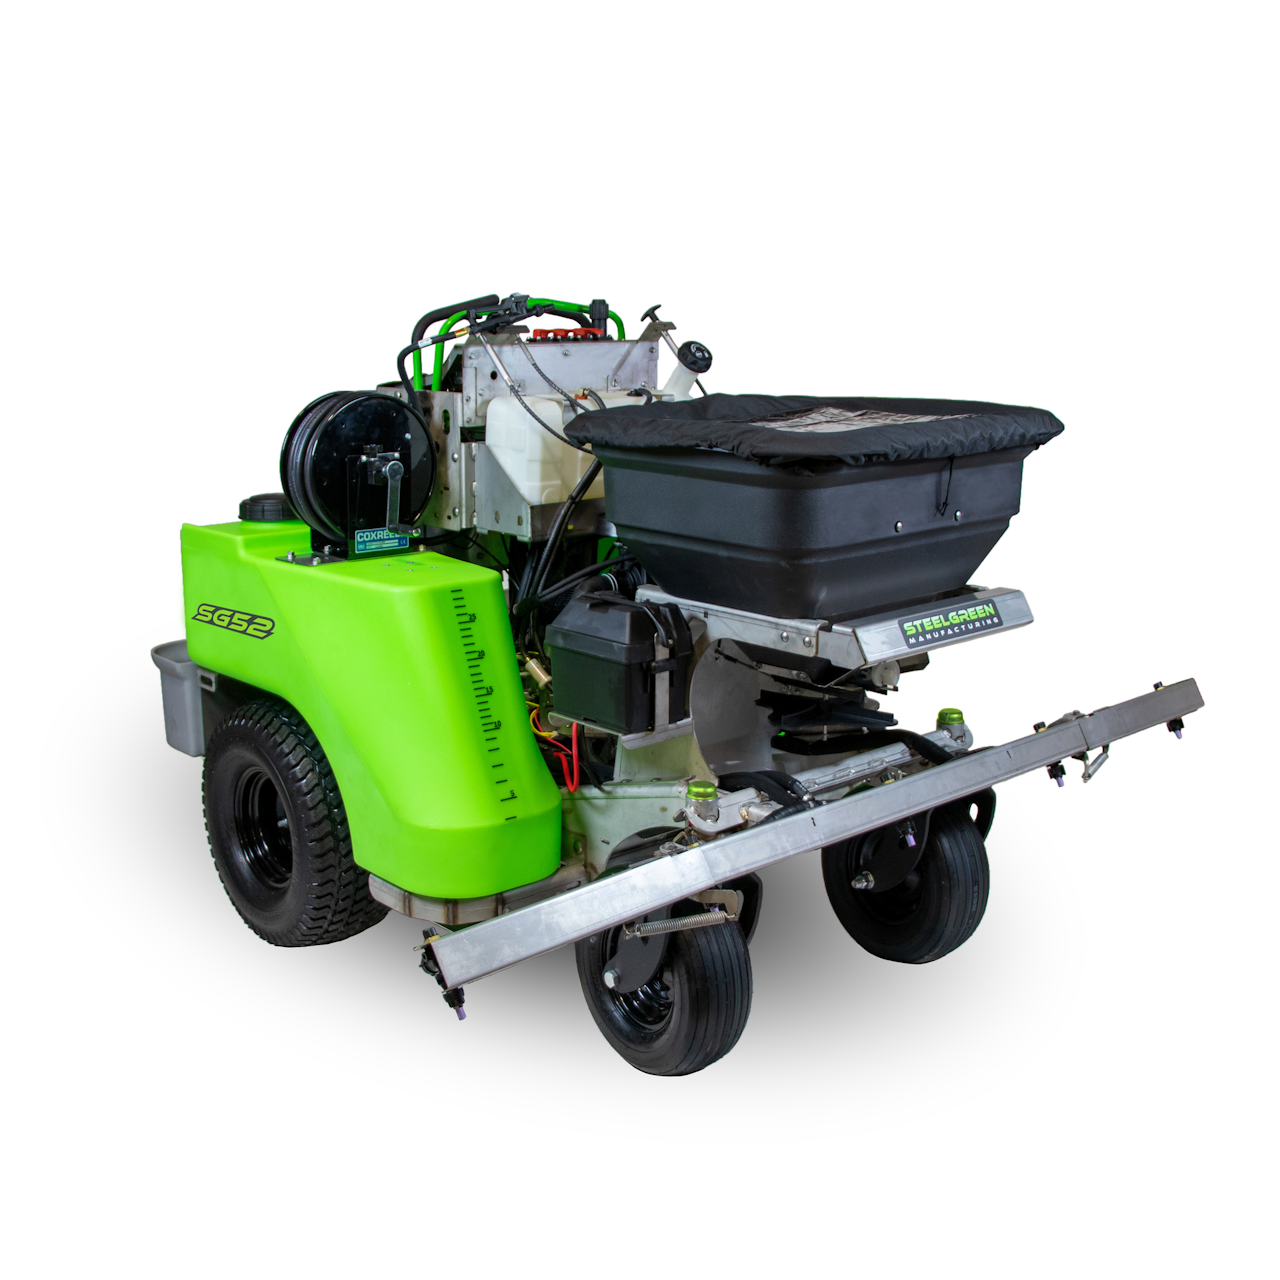 Steel Green's SG36, SG46 and SG52 Sprayer/Spreader Machines From